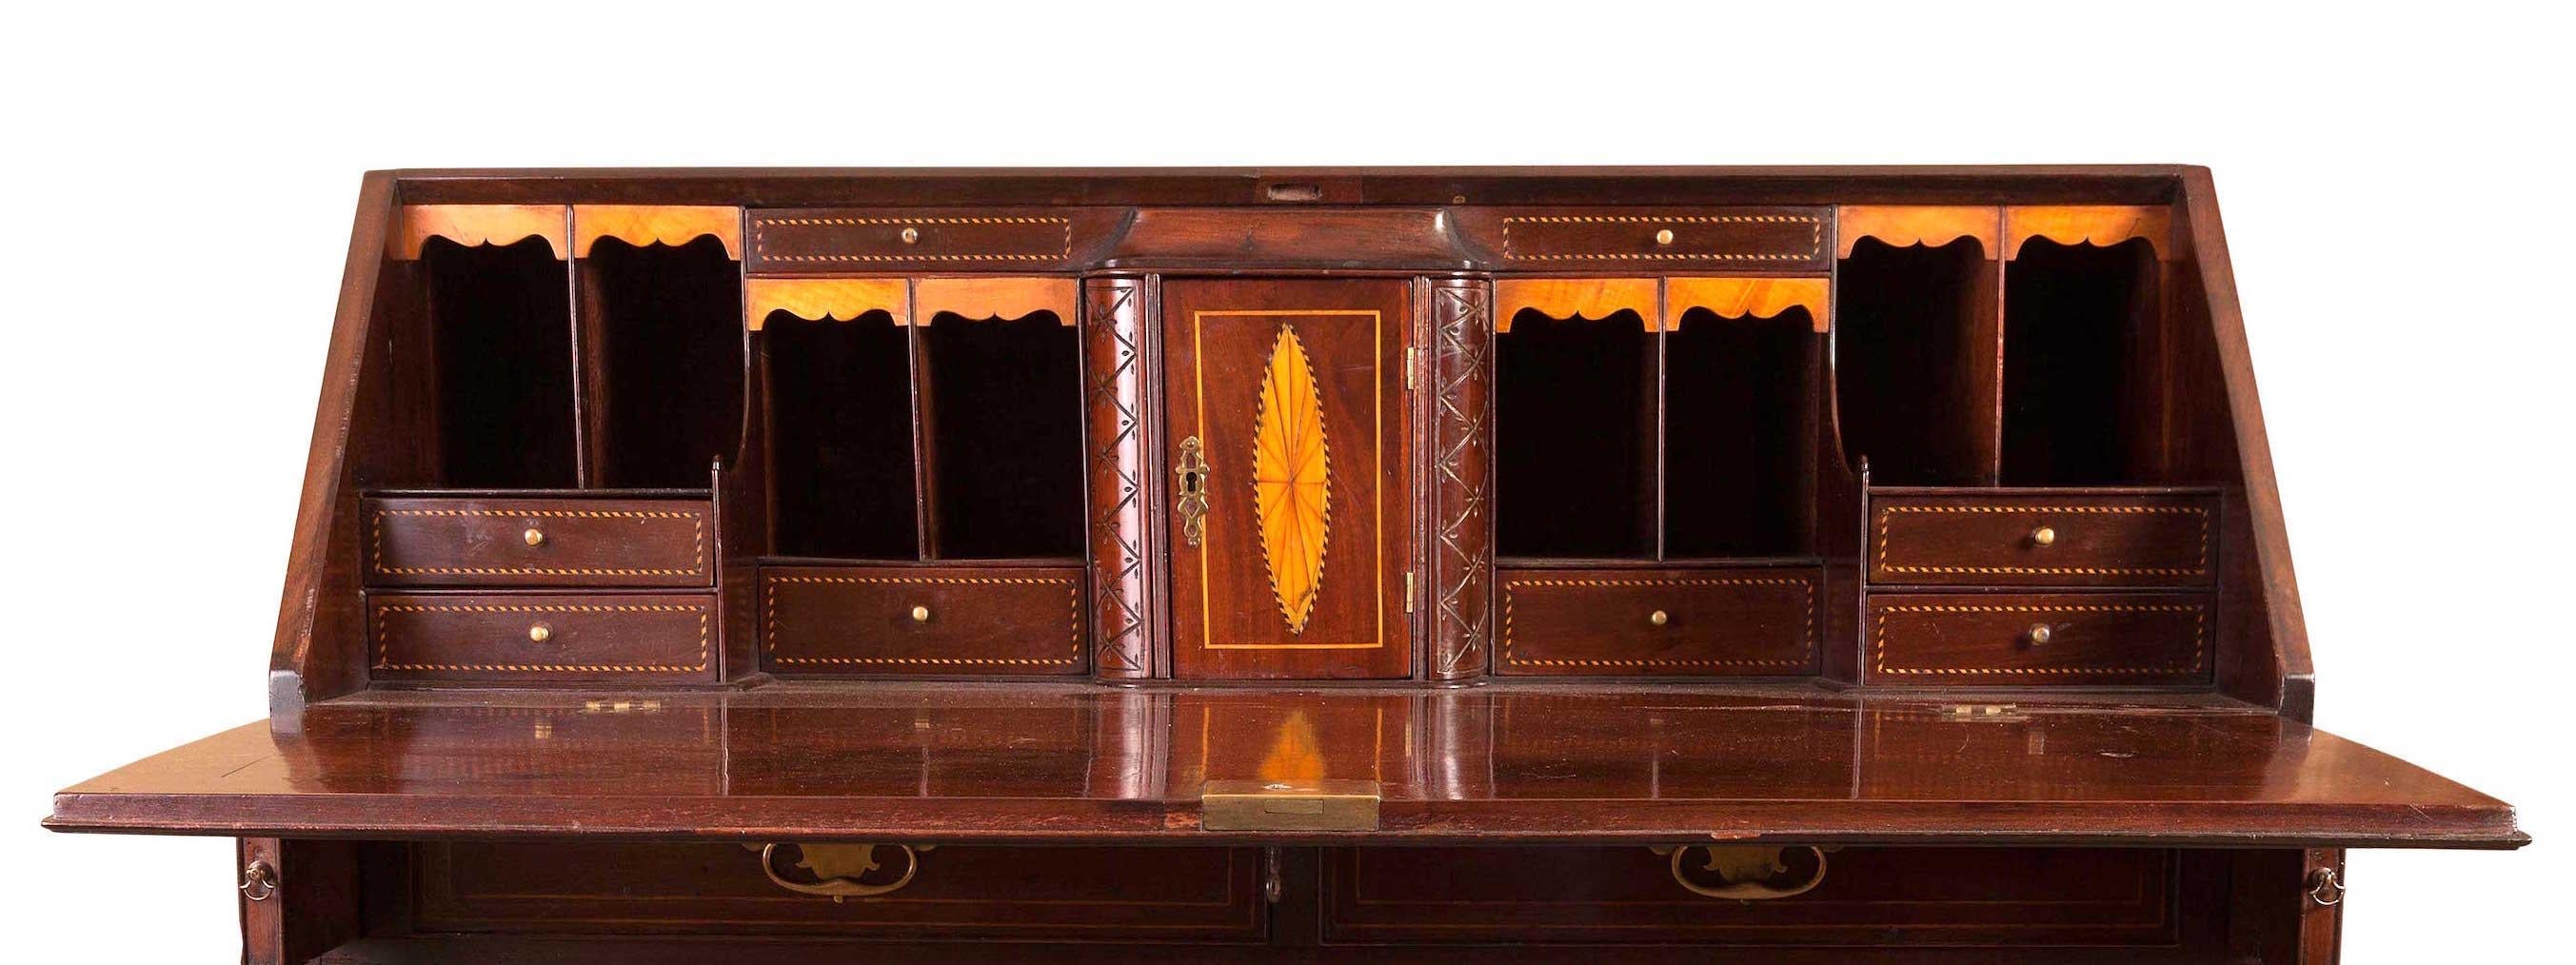 A George III Mahogany Bureau, circa 1770 with nicely fitted interior.
Two small and three large drawers, fall front opening to a very nice fitted interior with Pigeon holes, drawers and central cupboard flanked by secret drawers. Satinwood inlaid